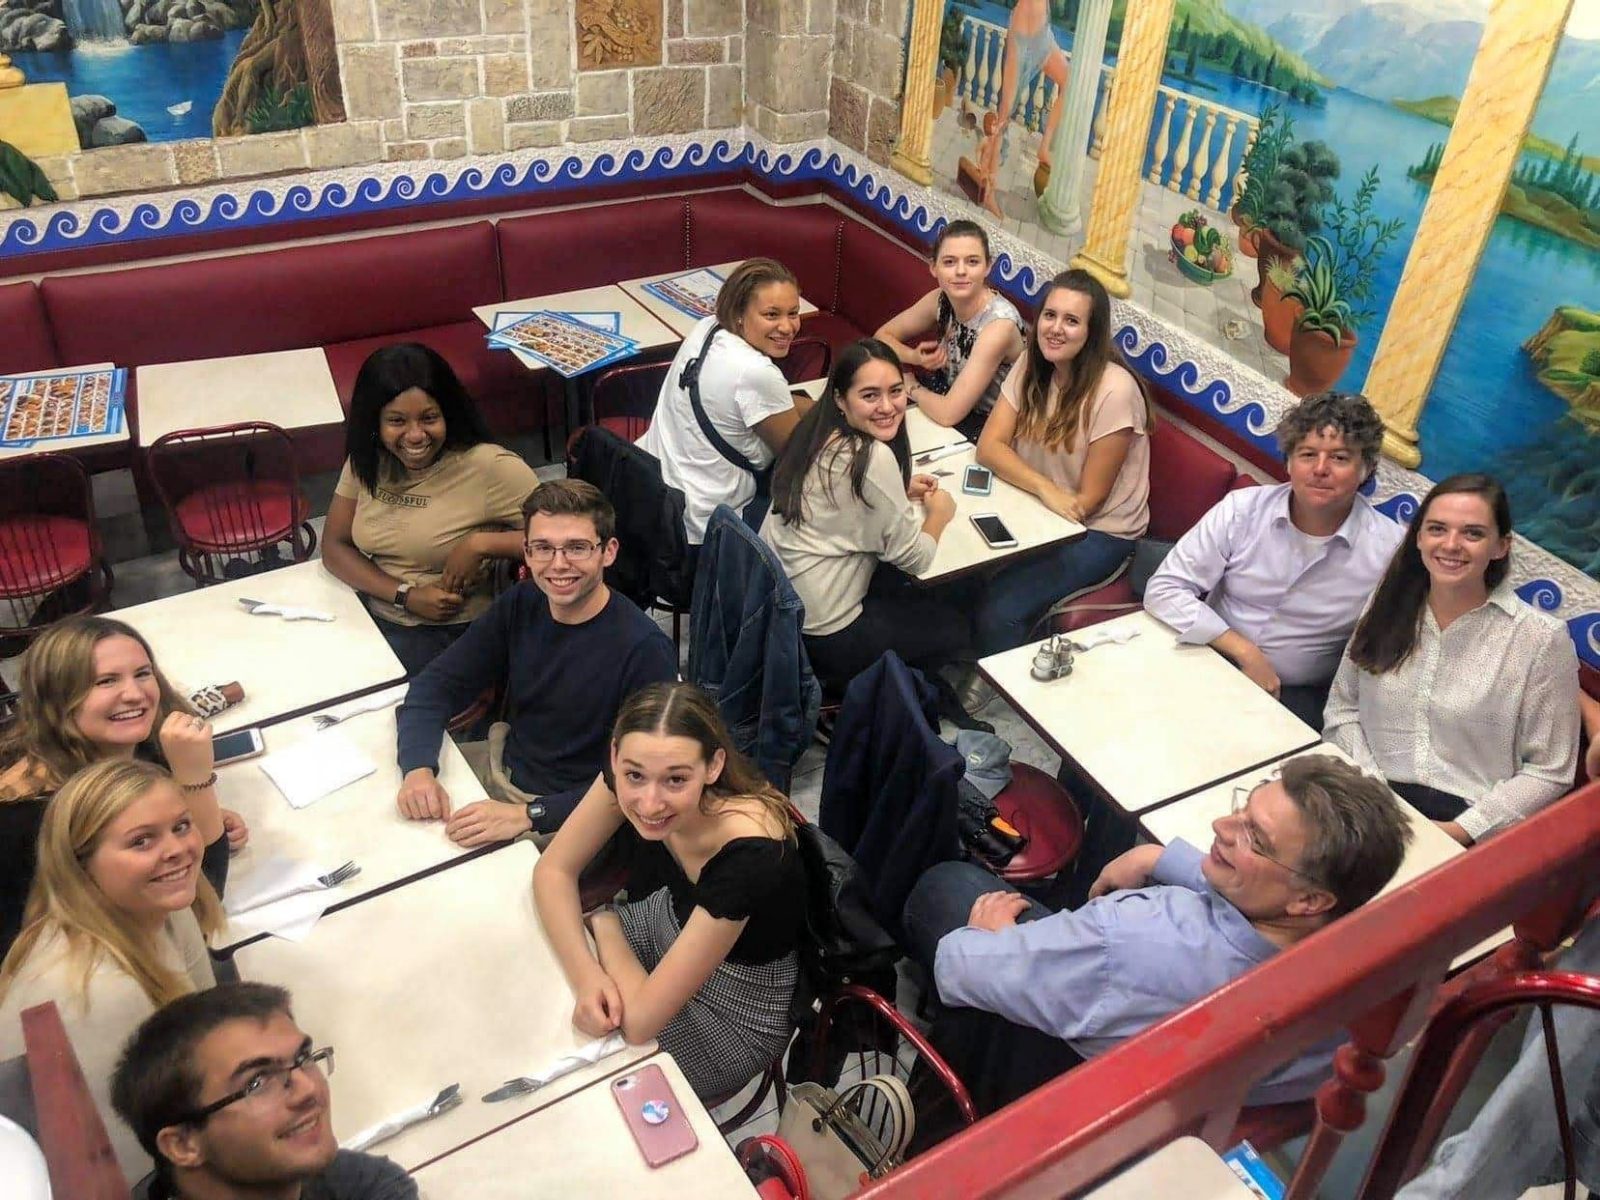 Group dinner in Brussels, Fall 2019